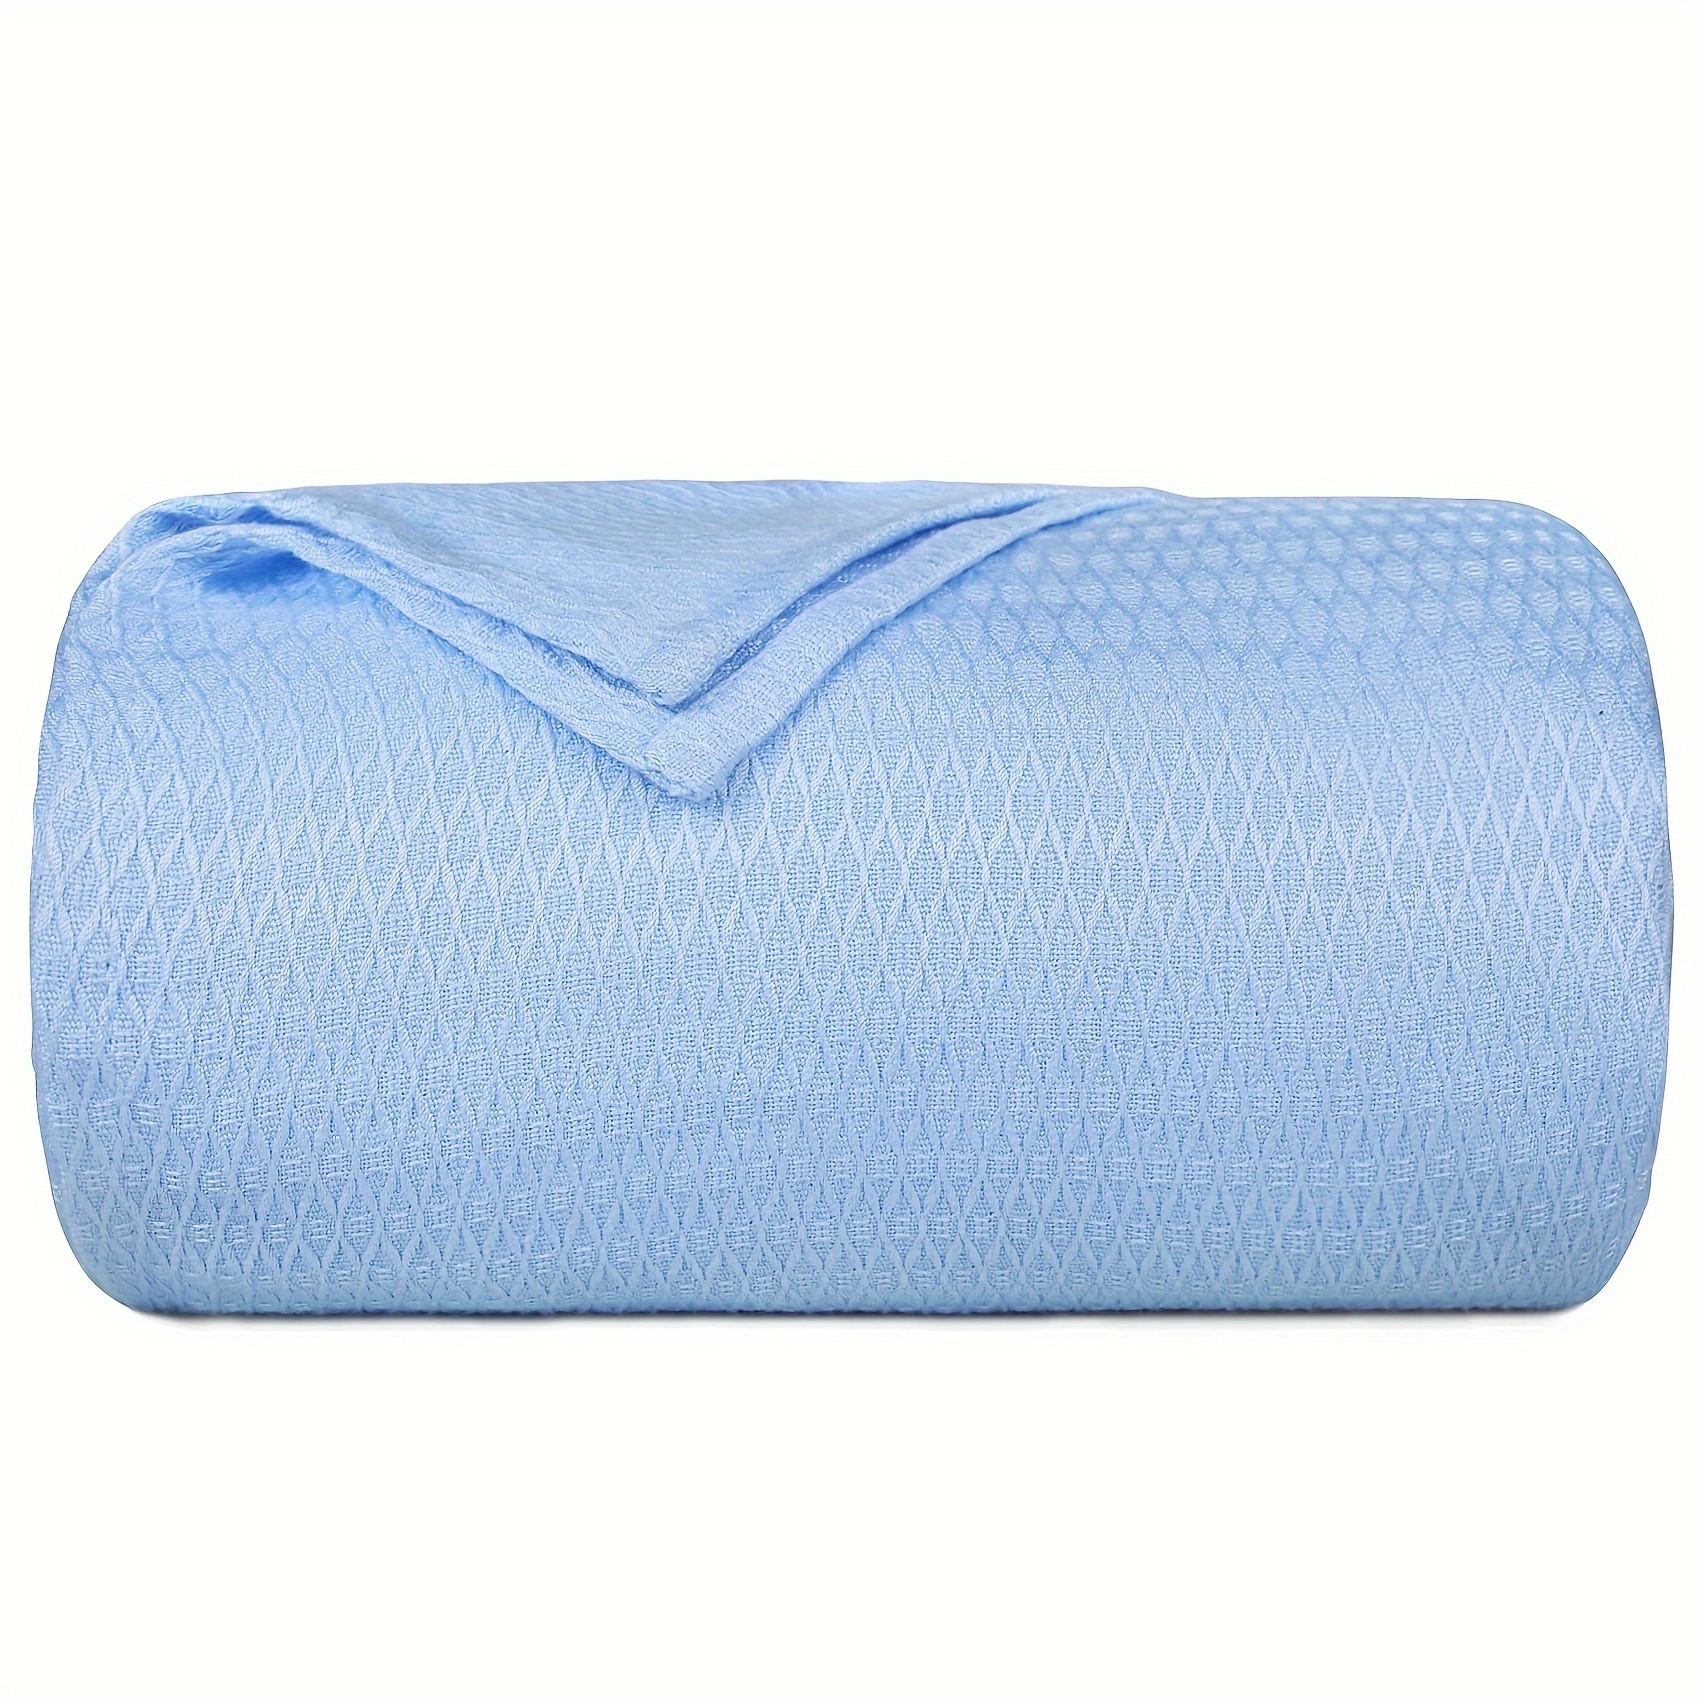 

1pc Cooling Blankets For Hot Sleepers Absorbs Heat To Keep Body Cool For Night Sweats, Lightweight Cooling Blanket For Sleeping Thin Blankets For Summer For Couch Bed All Season Blanket, Blue